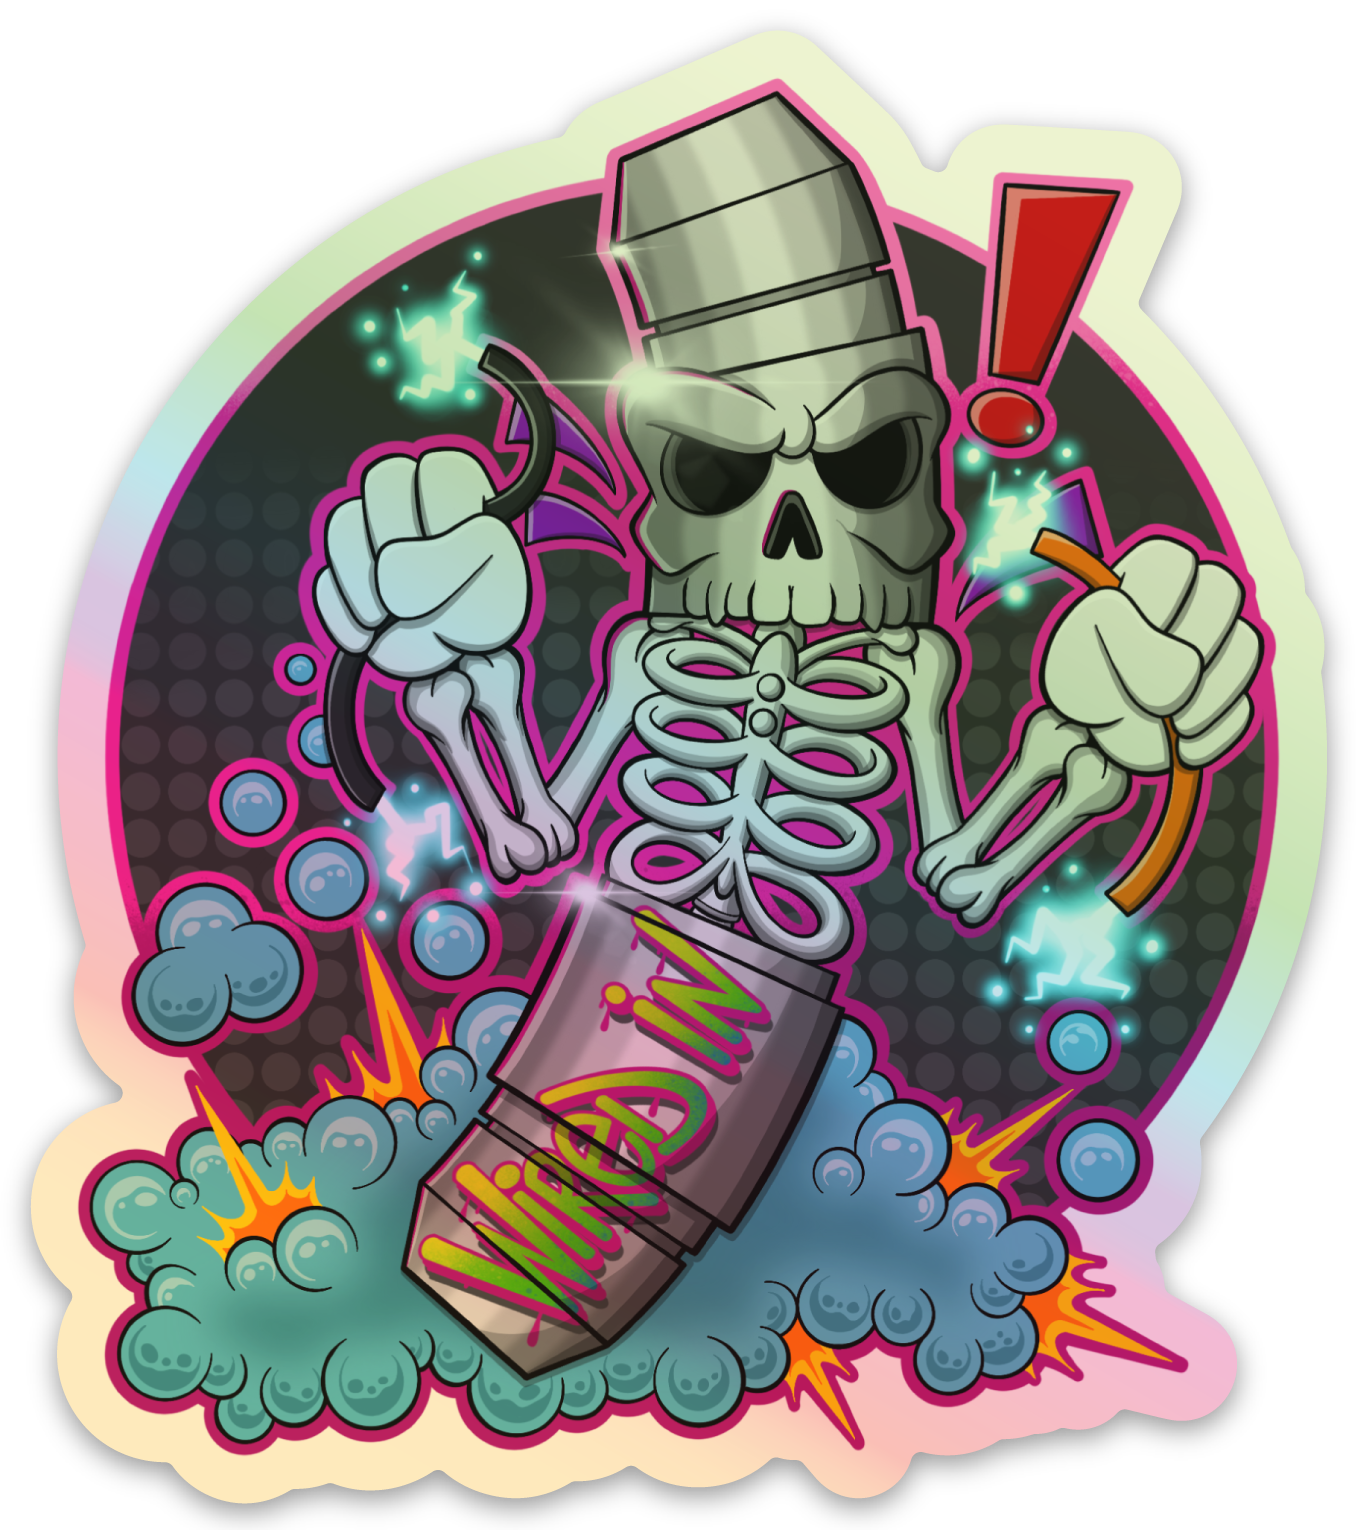 Wired In Mascot Holographic Stickers (Pack of Two) - Wired In